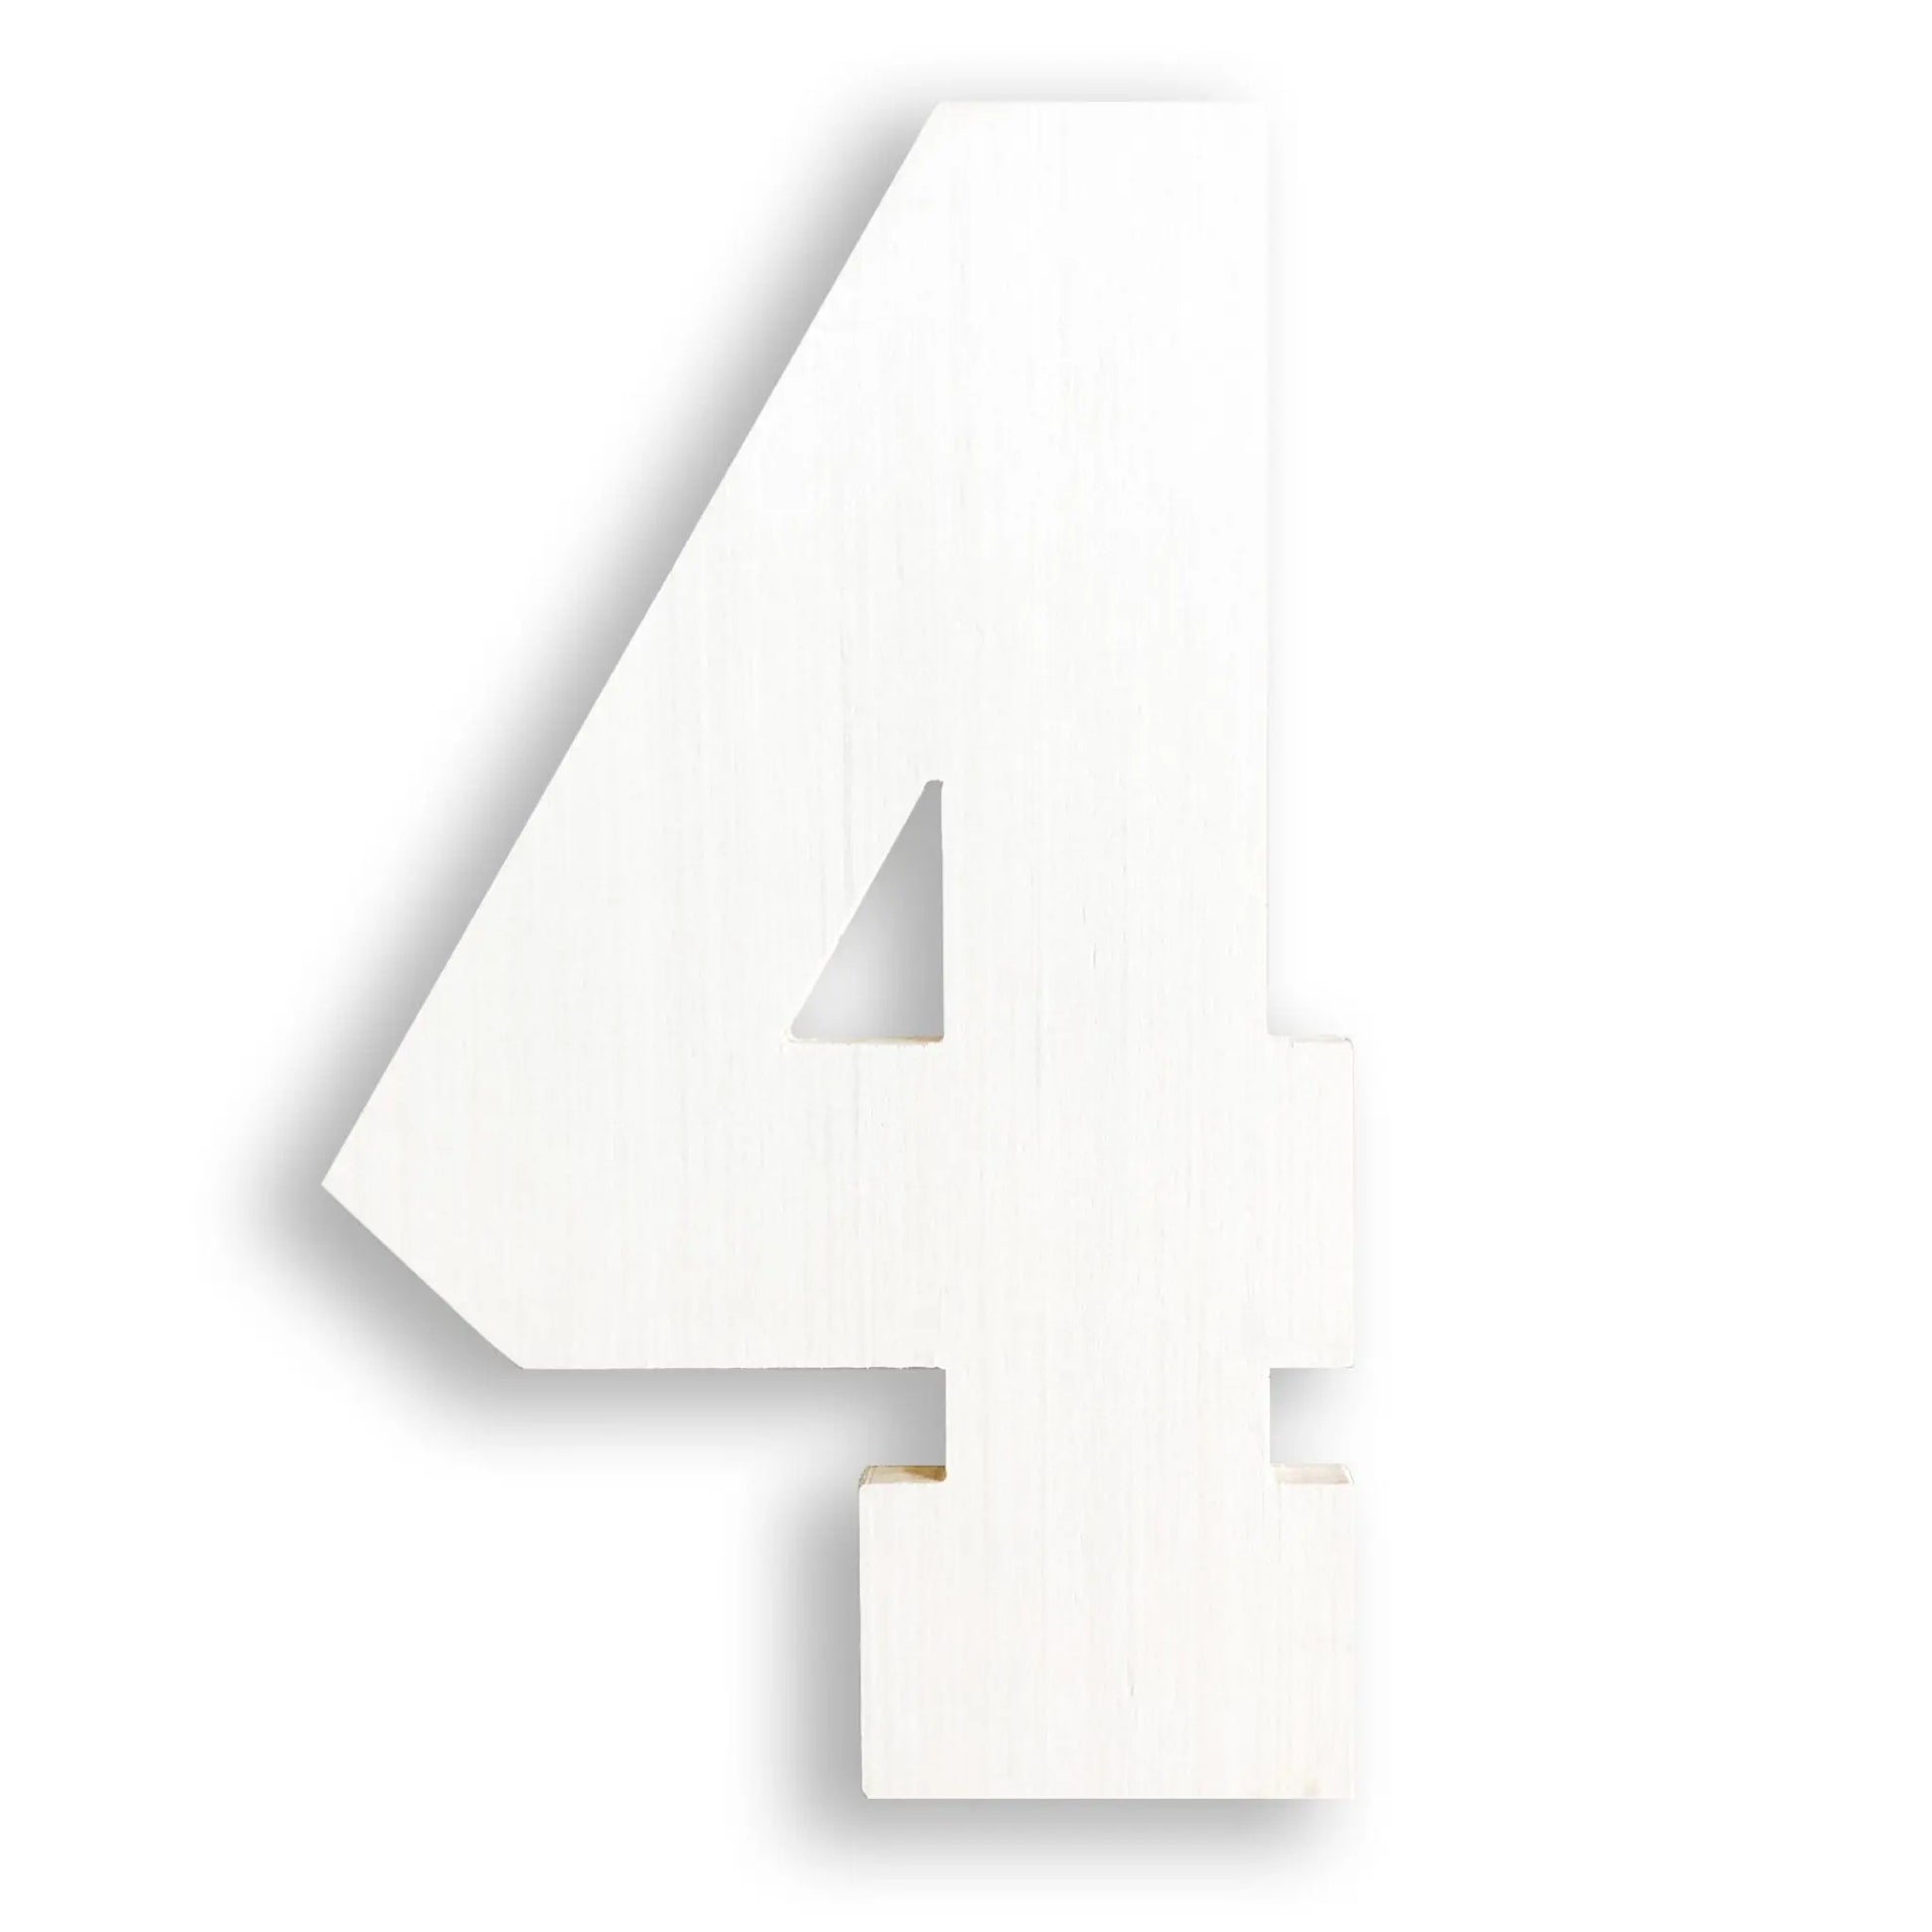 36 Inch Wooden Letters | Wooden Numbers, 3 Ft - collageandwood